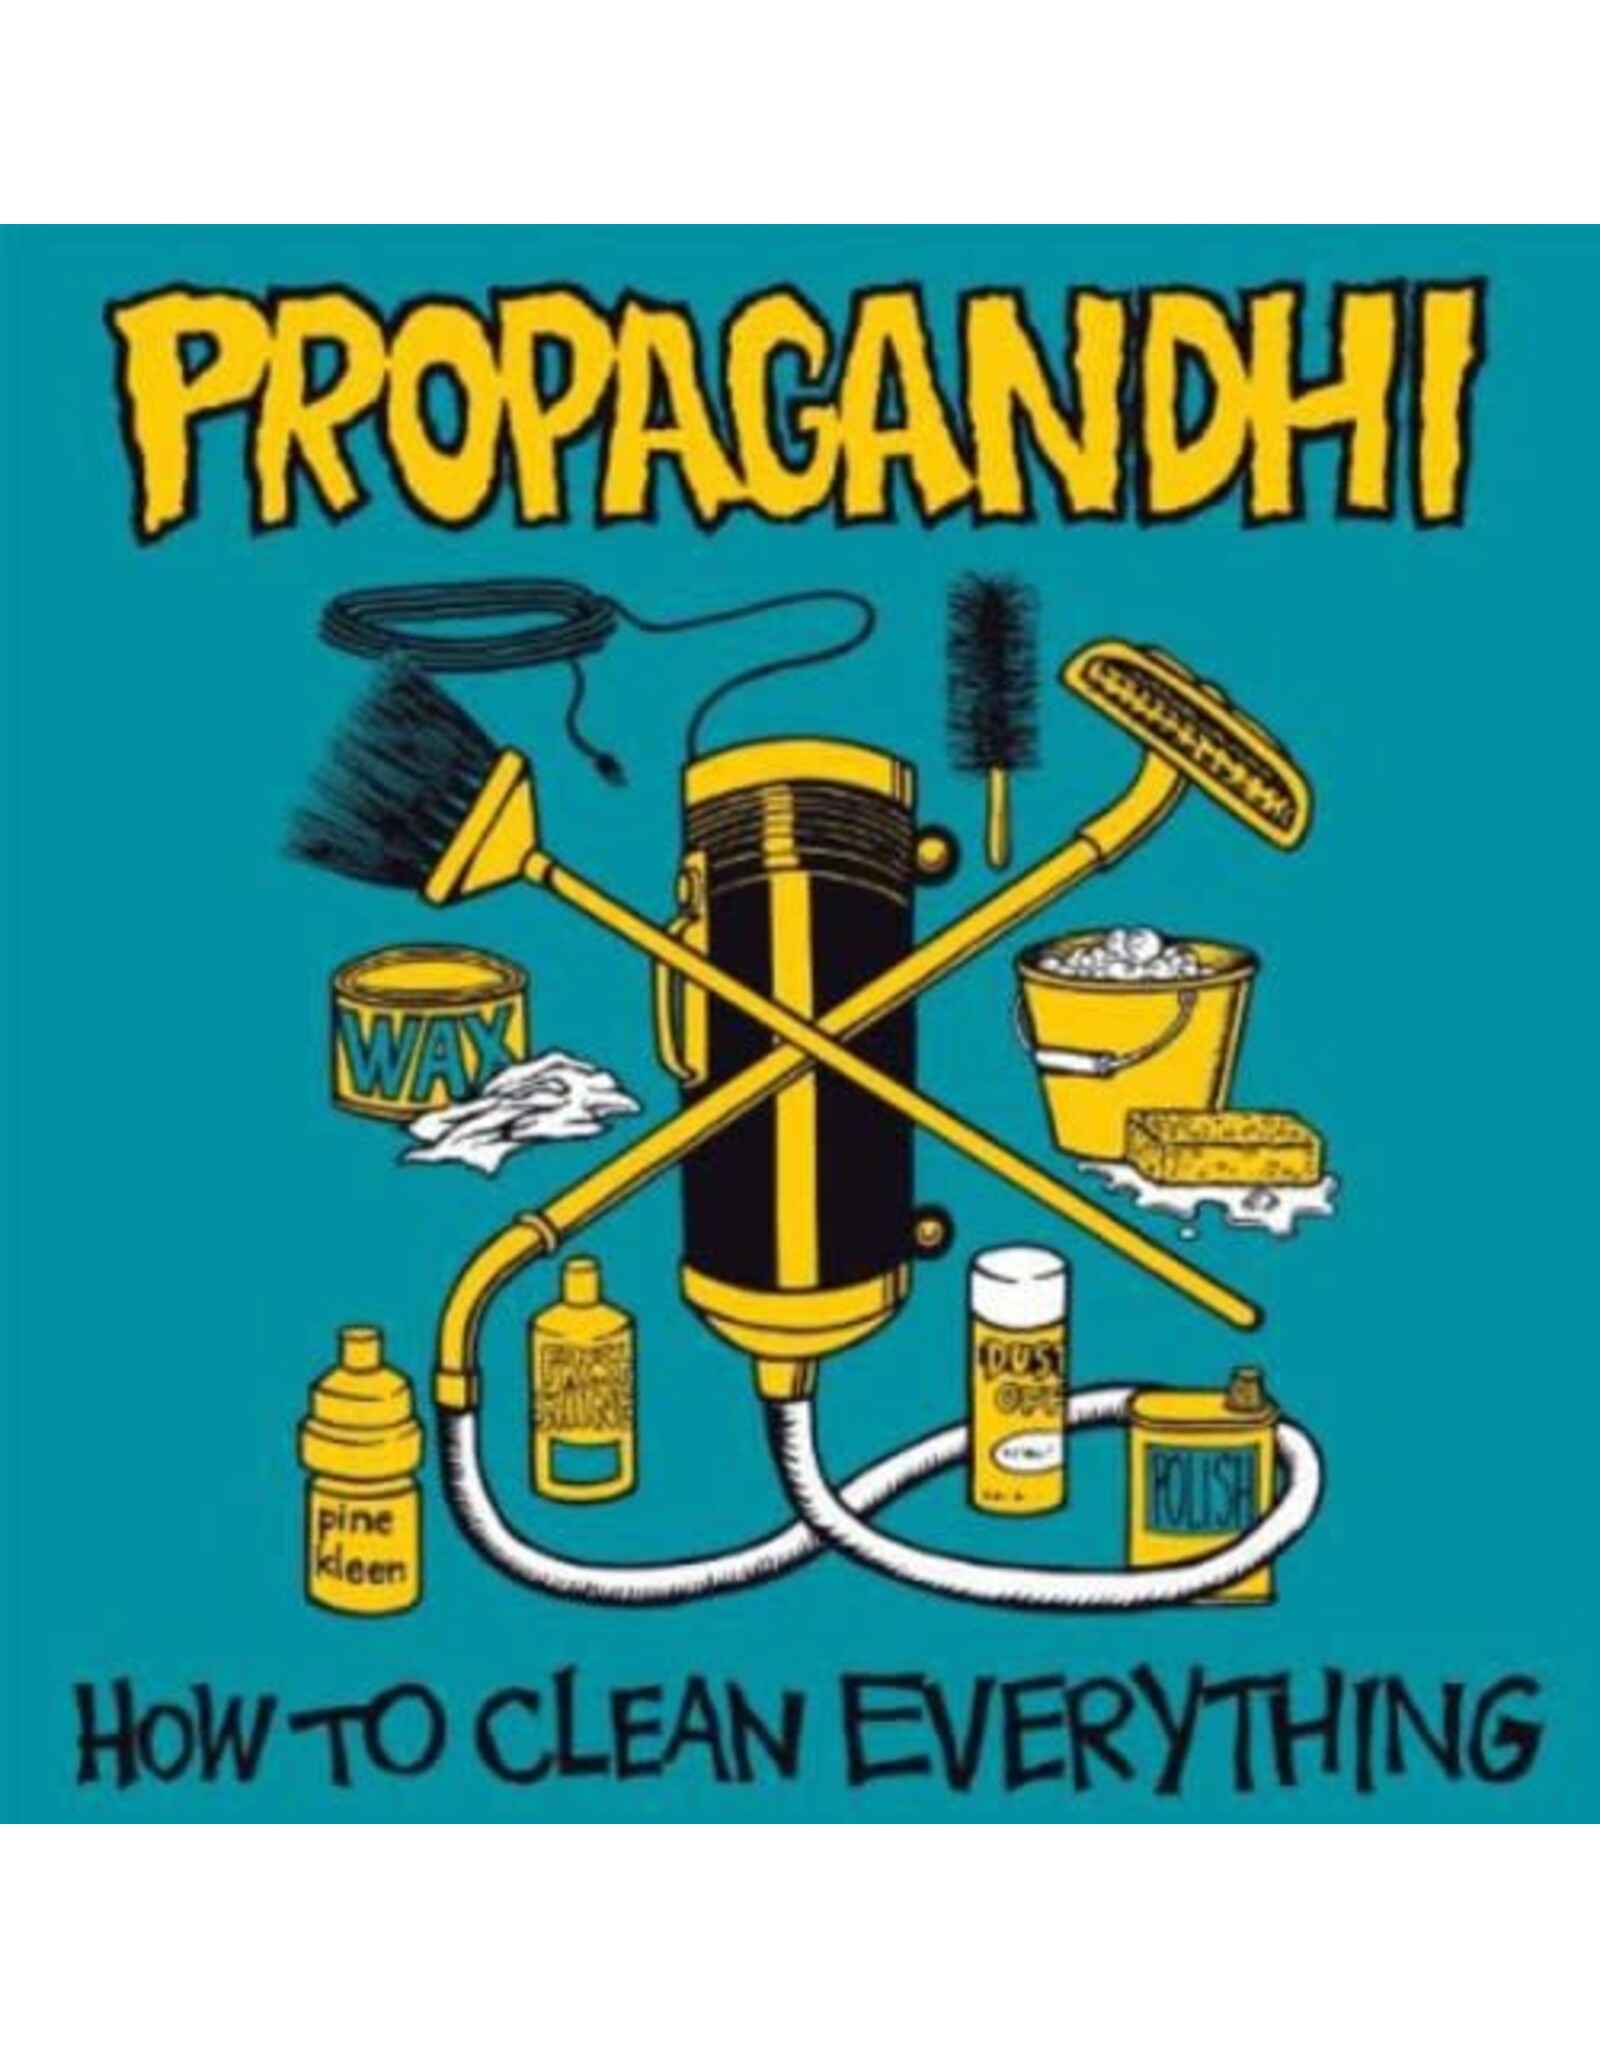 Propagandhi / How to Clean Everything